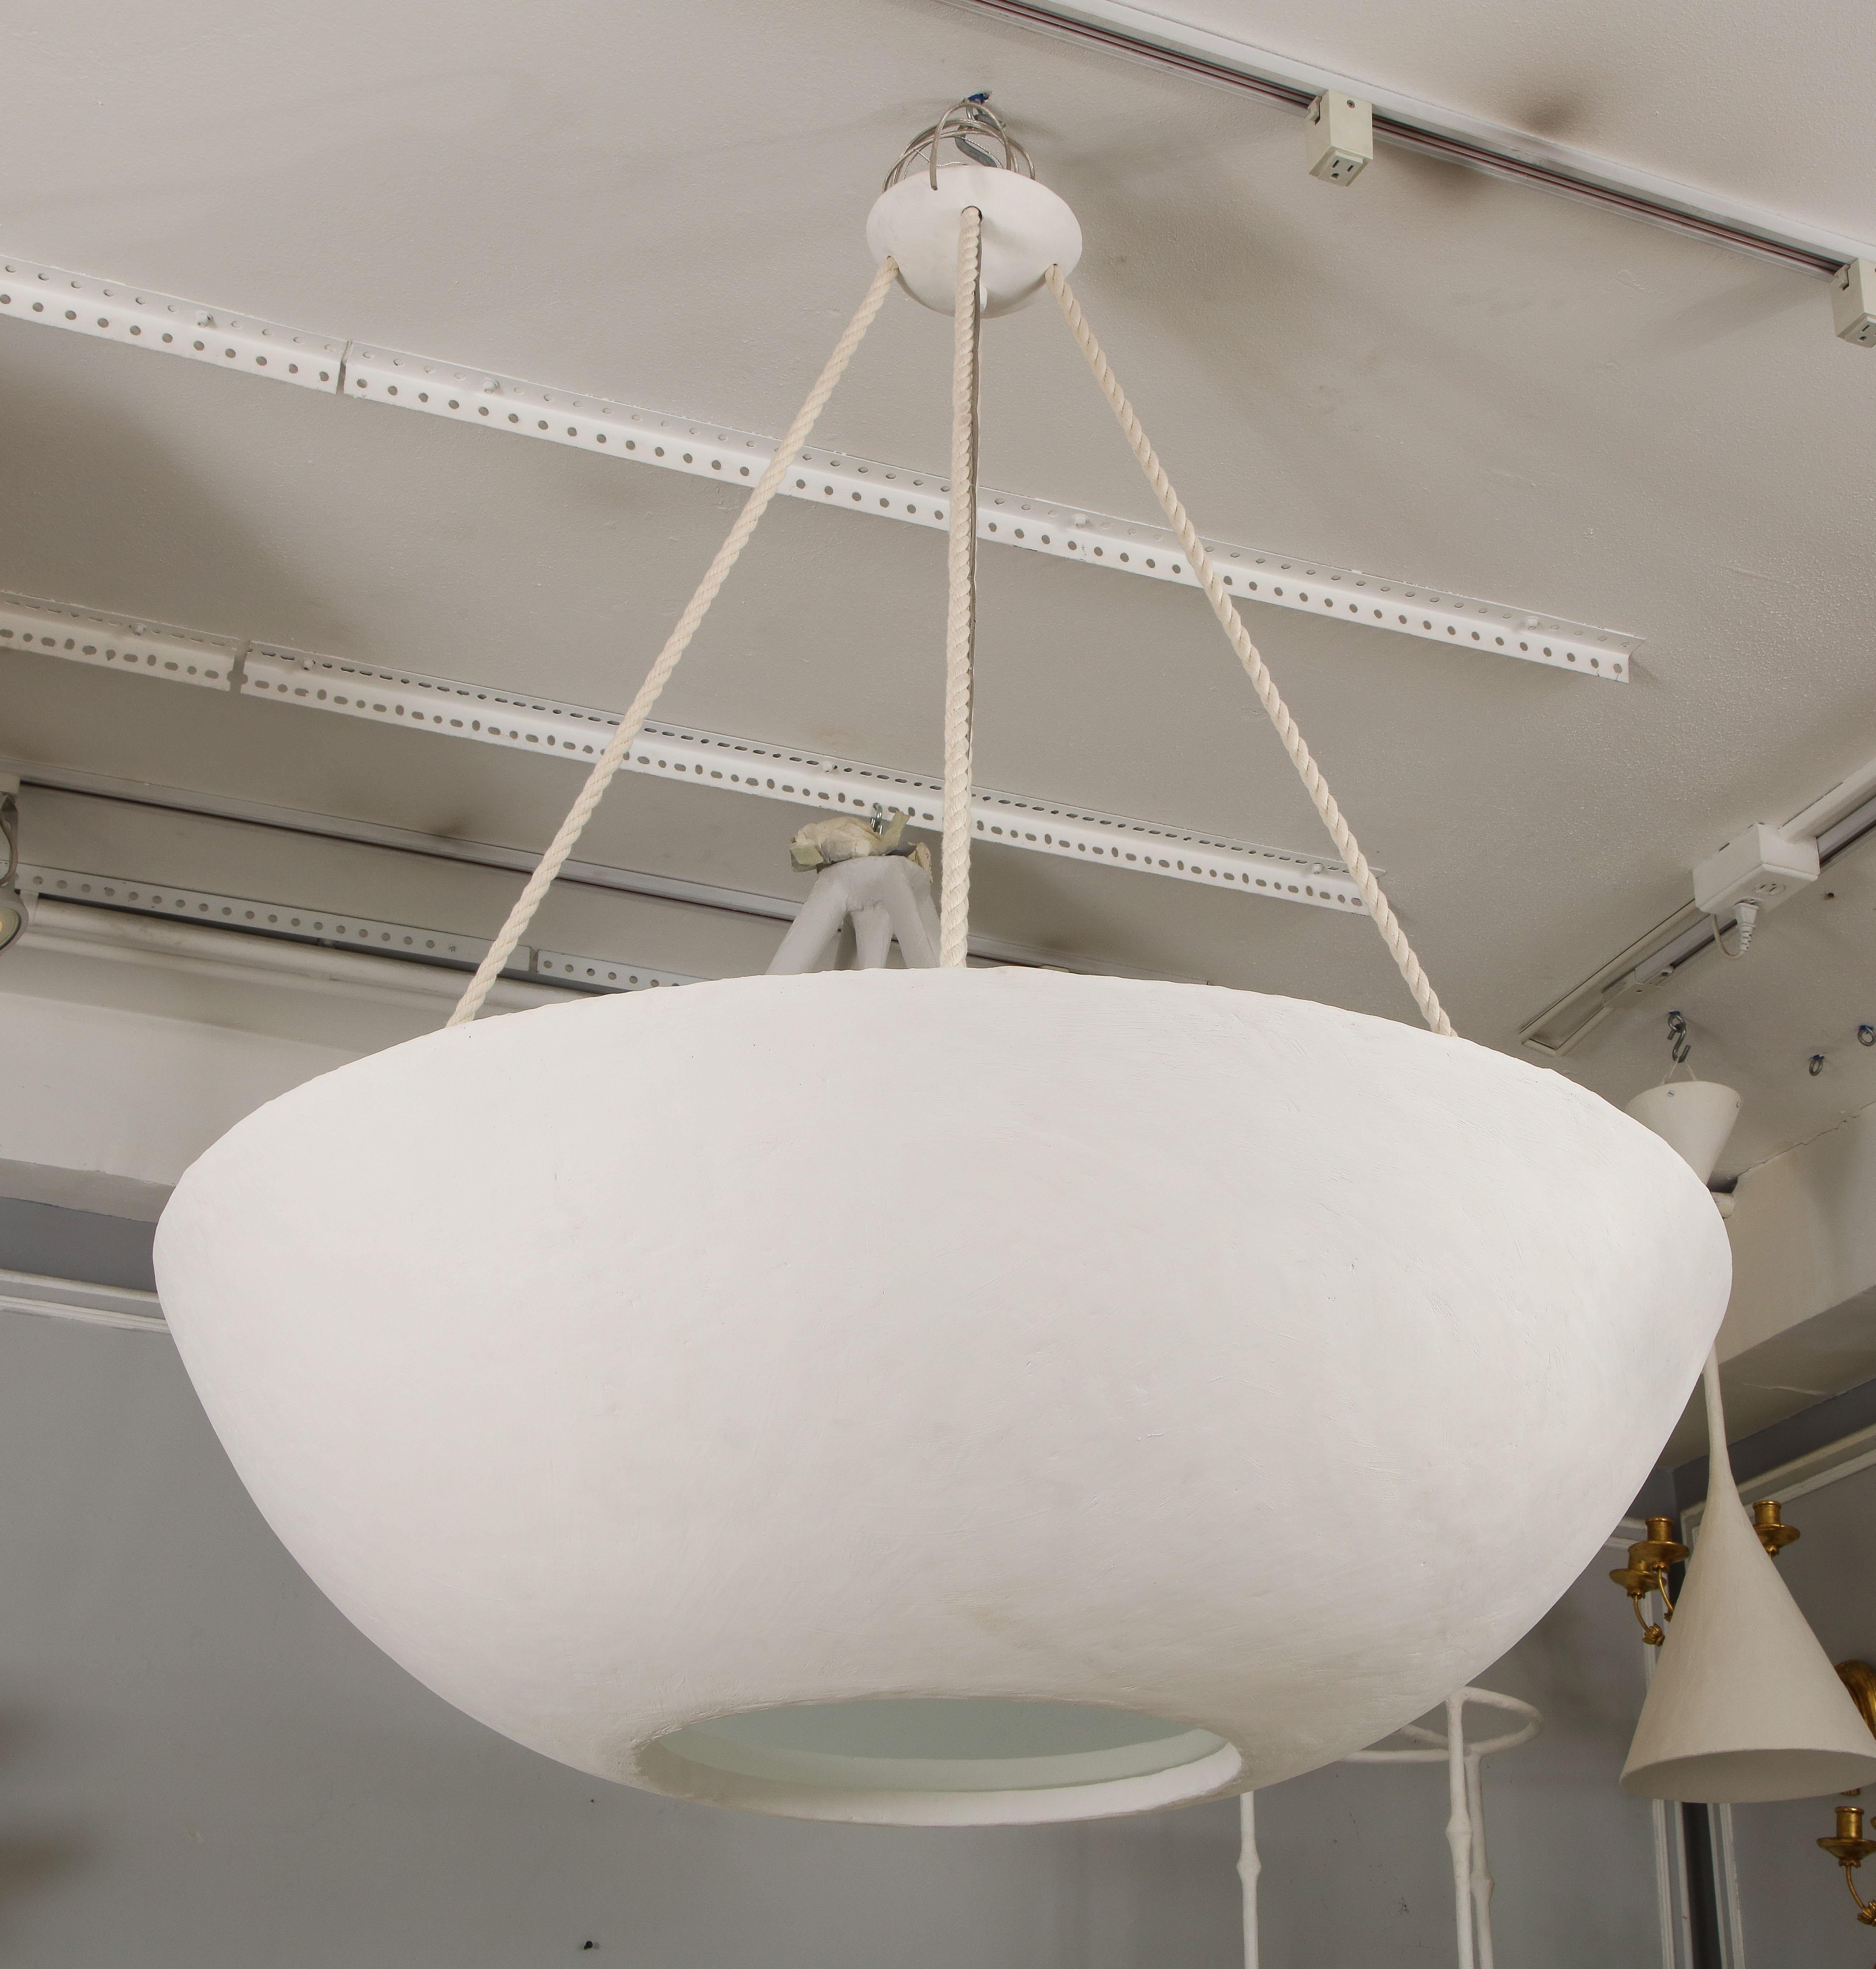 Our Custom Demille Plaster Fixture can be made in different sizes.
This fixture uses (8) e-12 Edison bulbs at 40 watts each for a total of 320 watts within the interior of dome. The second height of 11